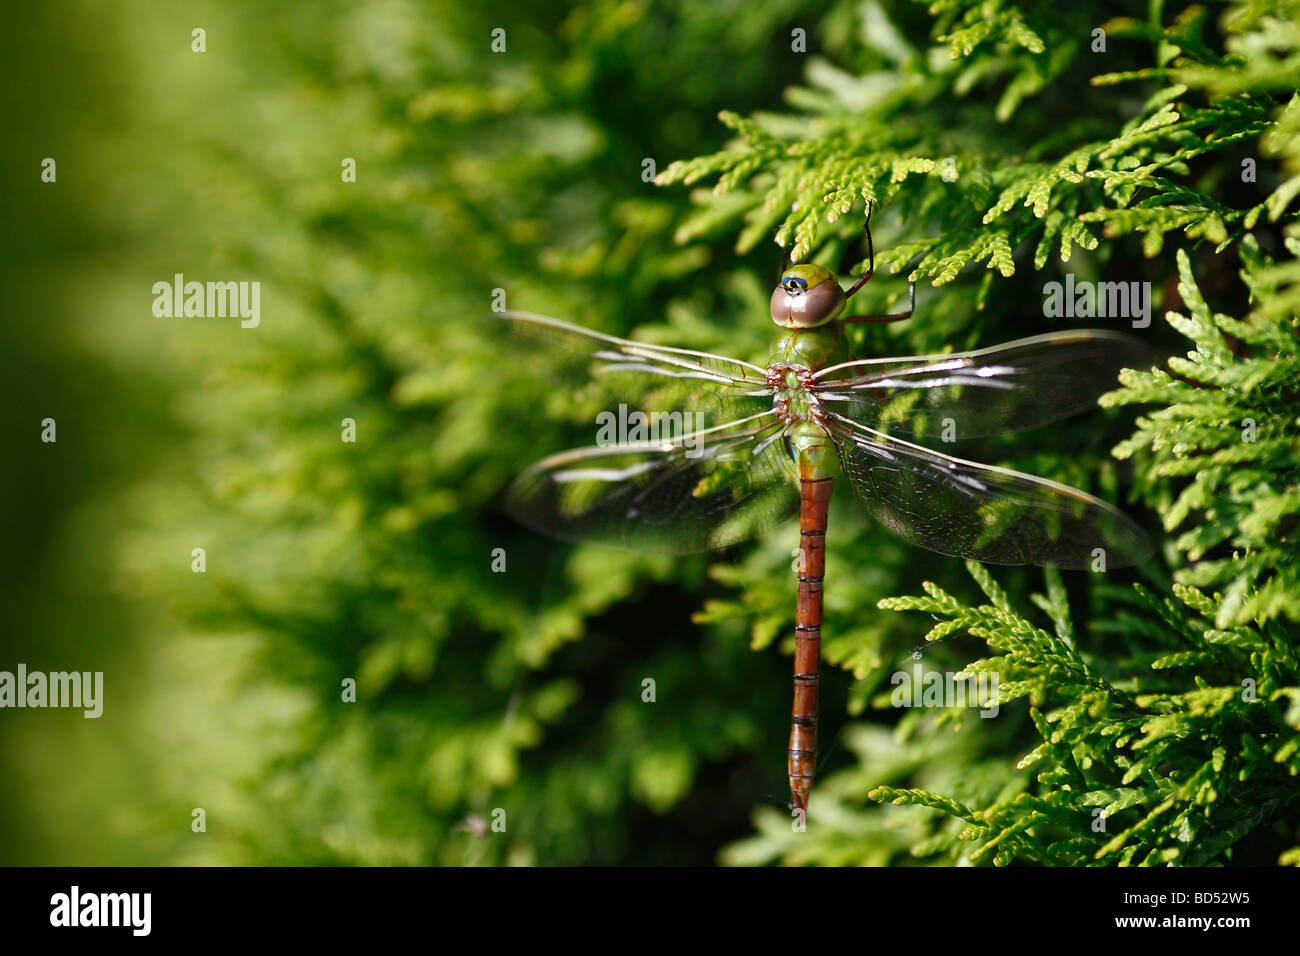 Dragonfly Green Darner insect sitting on thuja tree nobody isolated not people Stock Photo